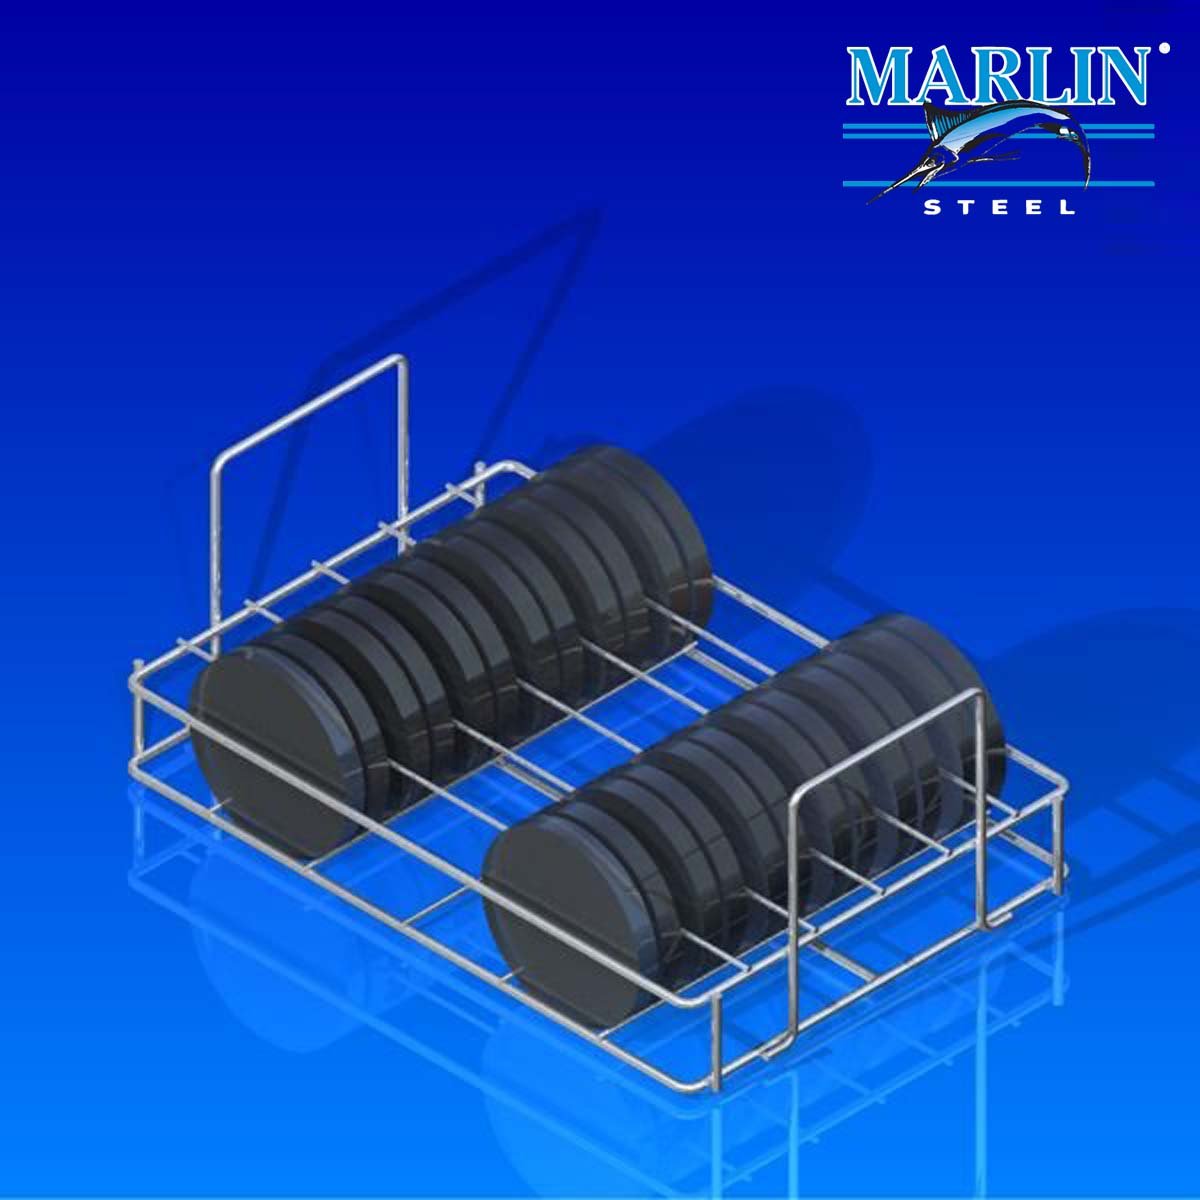 Marlin Steel Wire Baskets with Dividers 1131001